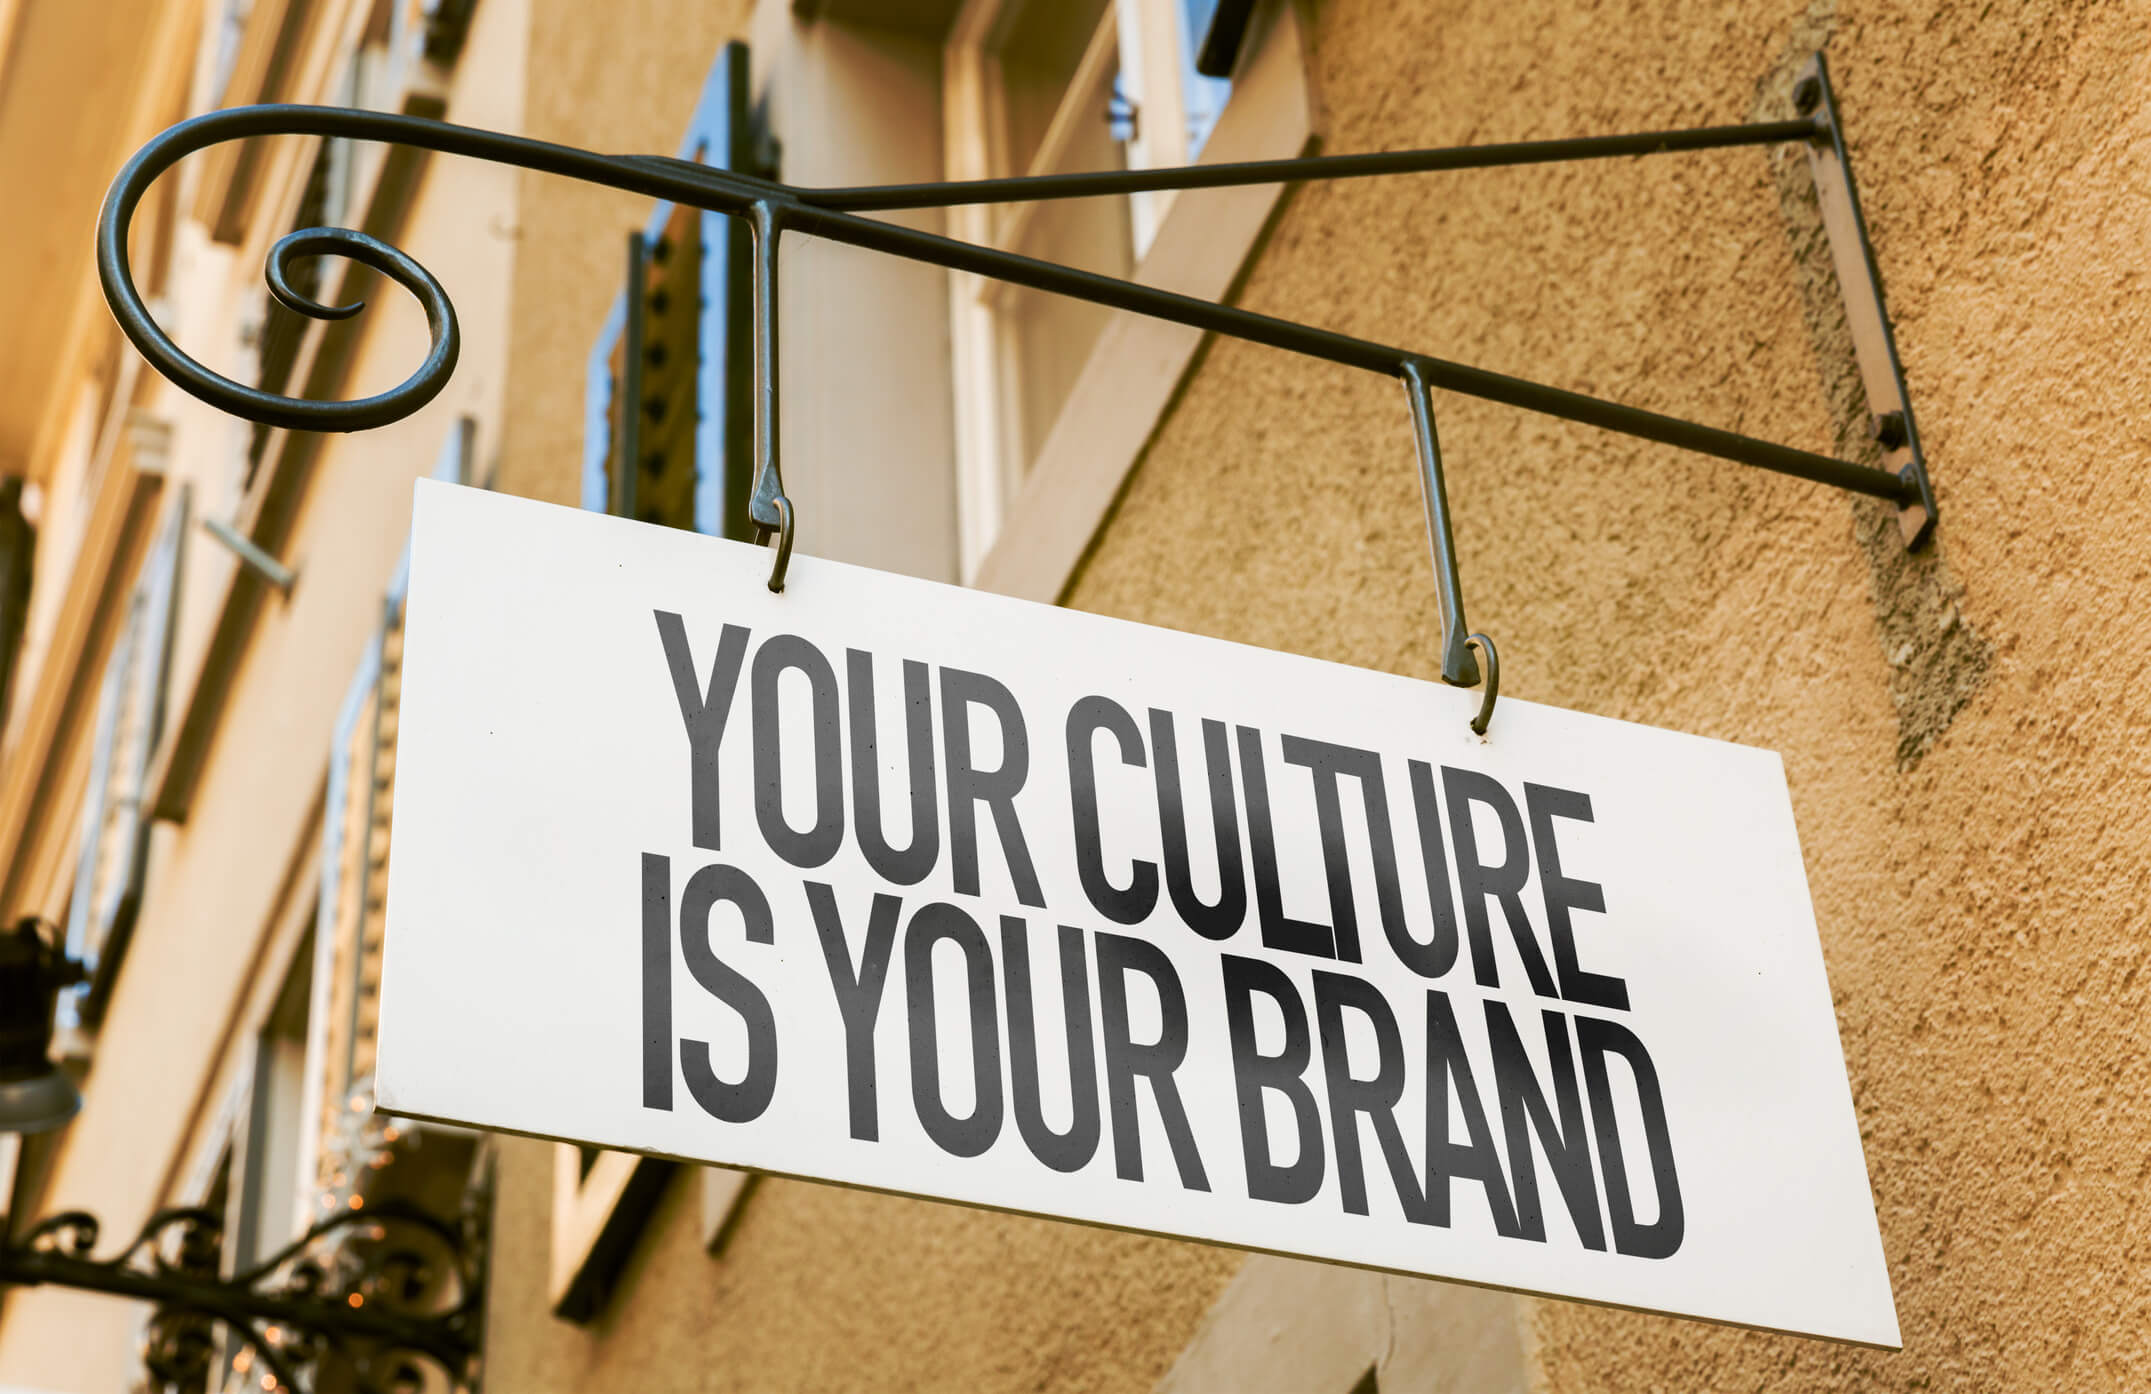 Your Culture is Your Brand cafe sign